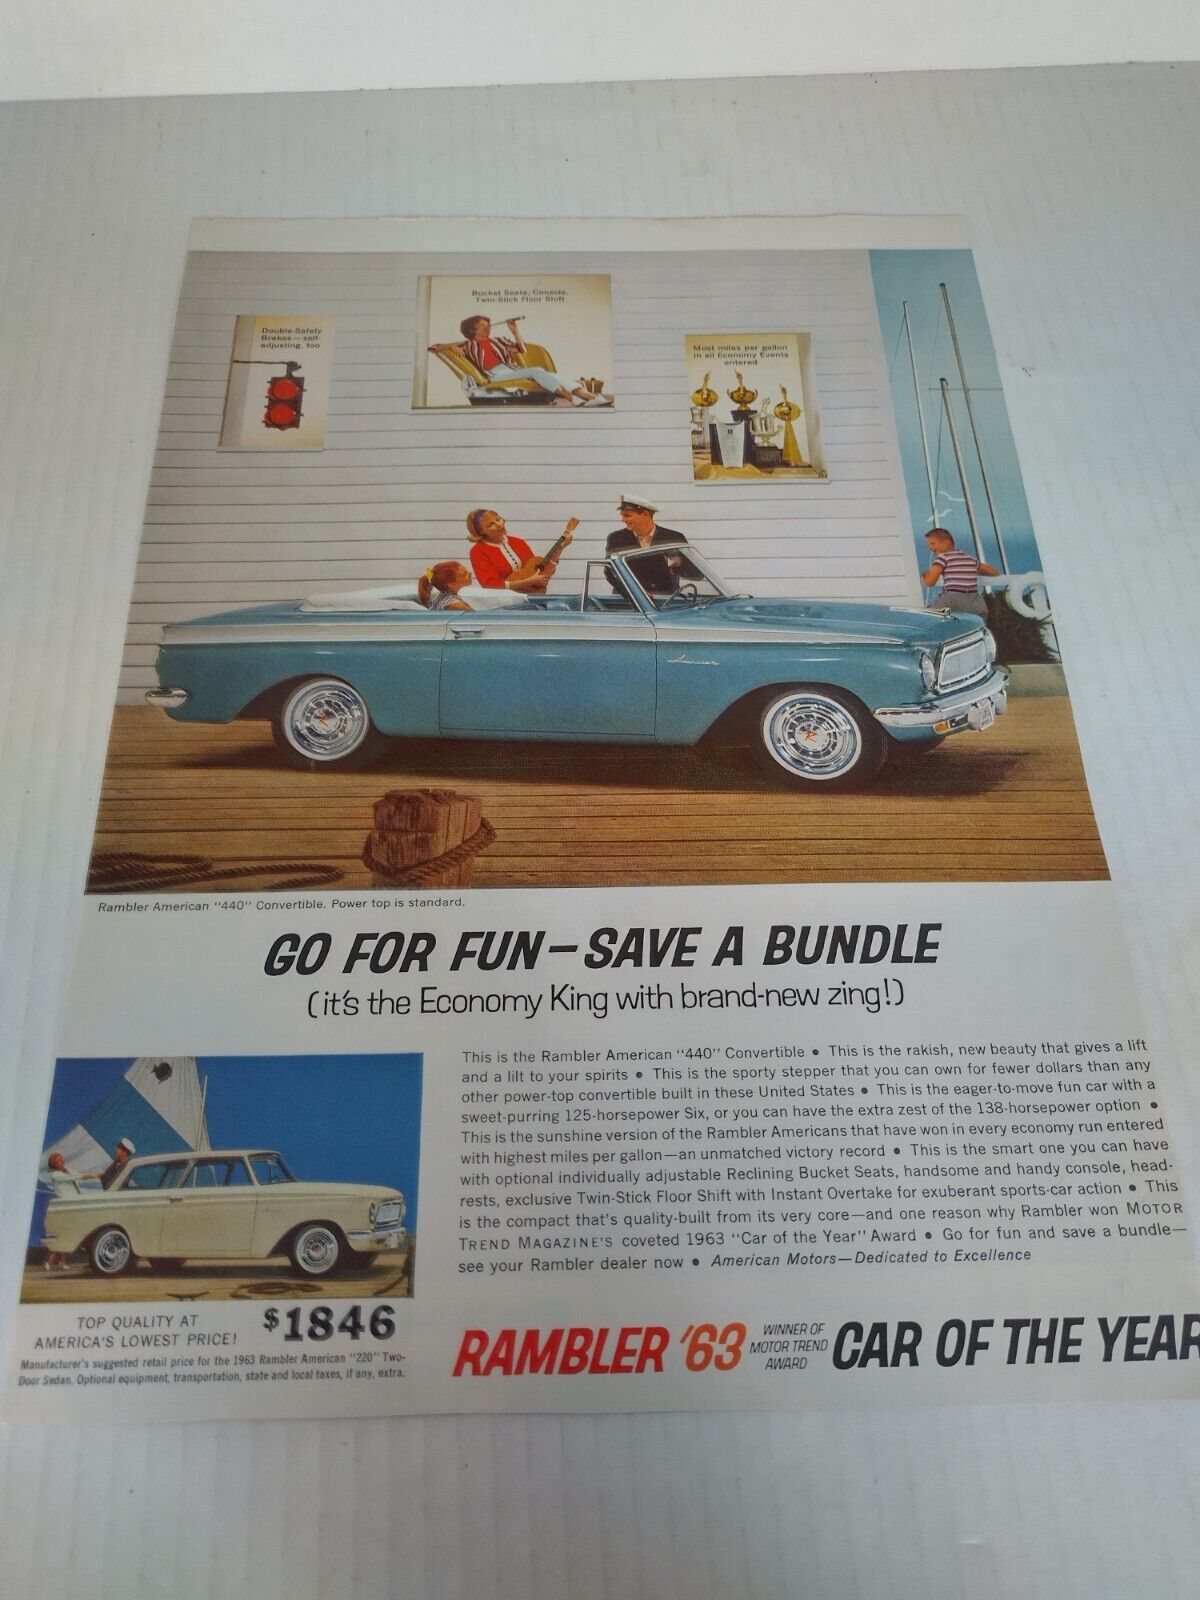 1963 Vintage Print Ad Rambler American 440 Blue Convertible Car Of The Year